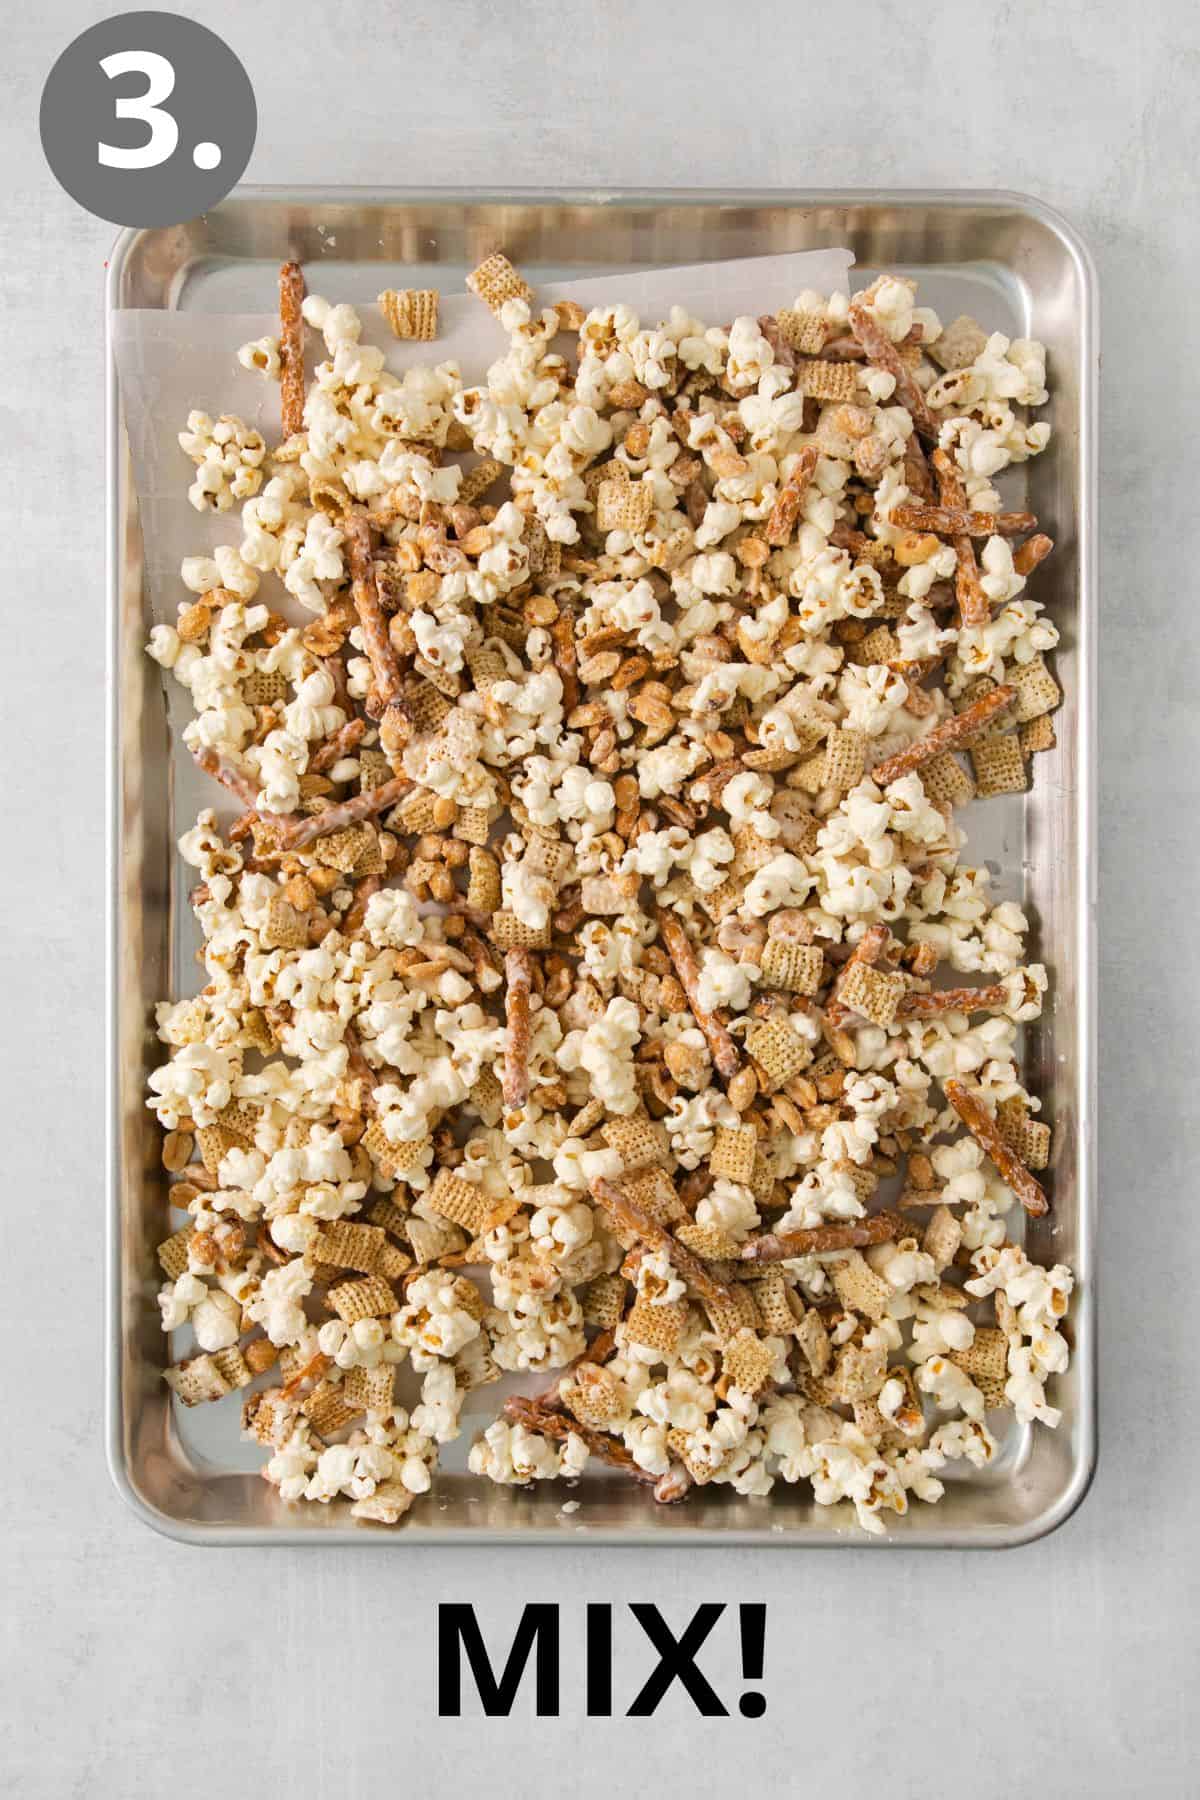 Snack mix spread on a baking sheet